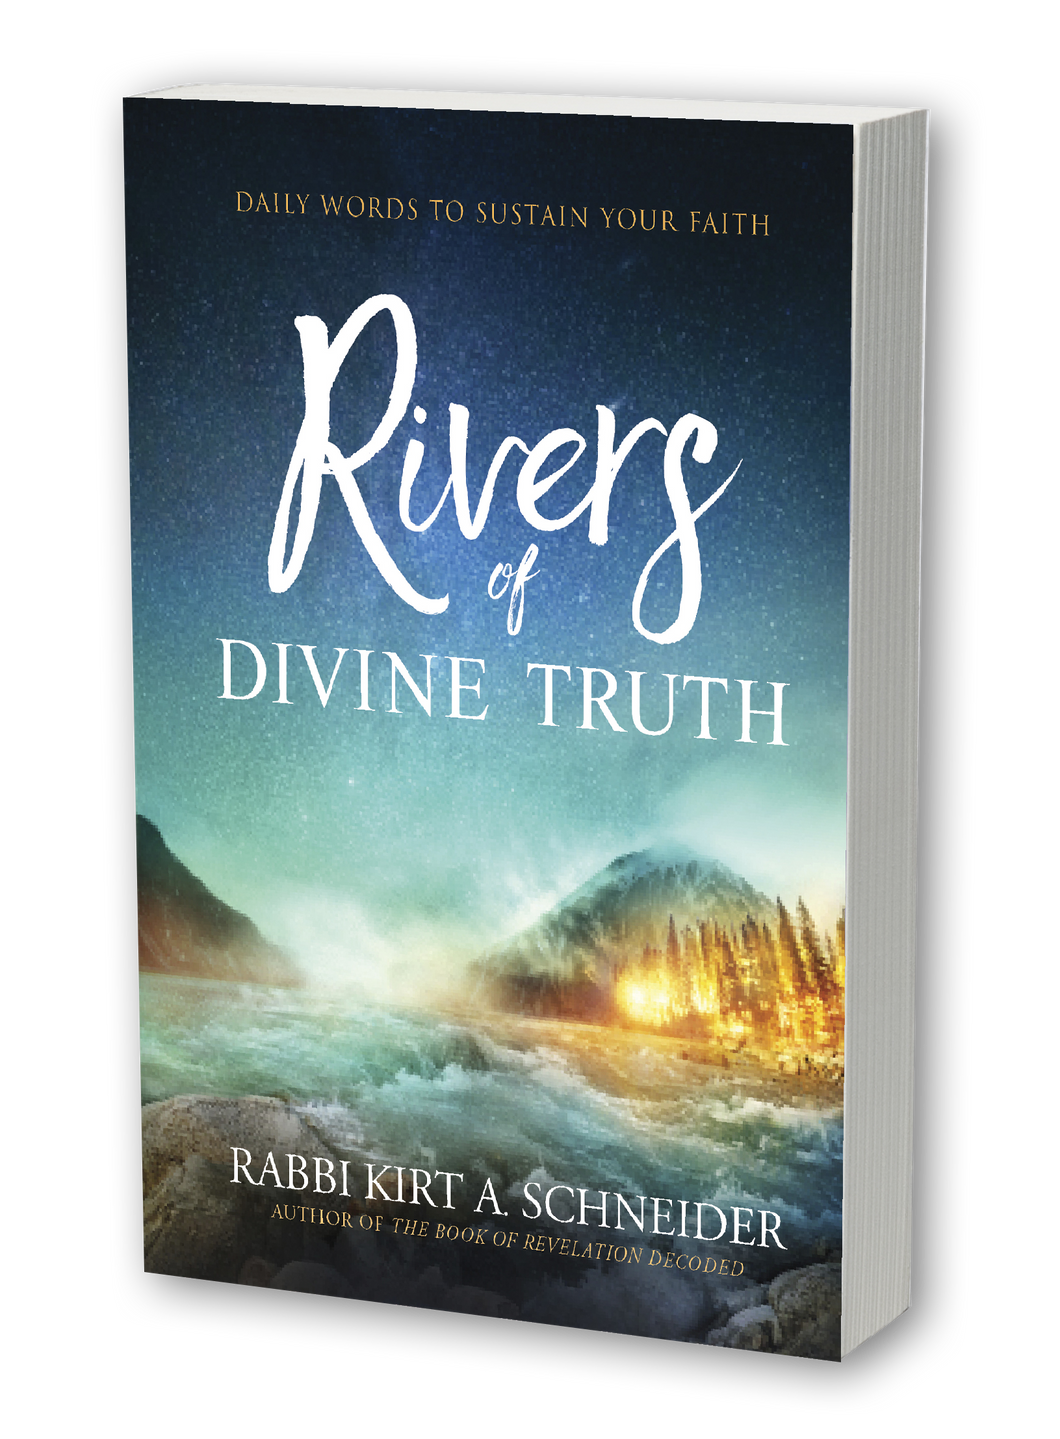 Rivers of Divine Truth: Daily Words to Sustain Your Faith (Hardcover)